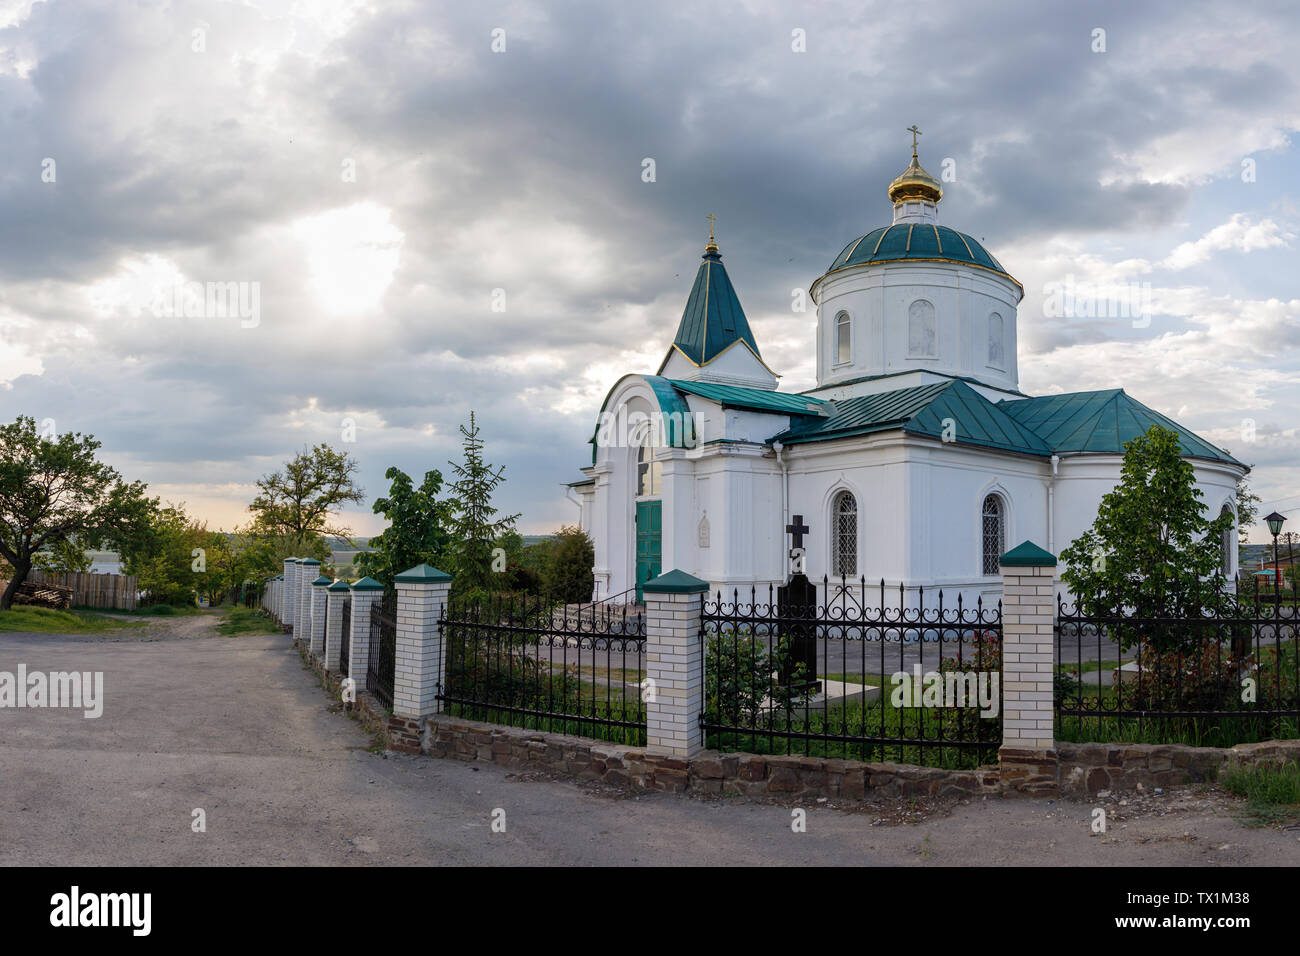 NIKOLAEVKA VILIAGE, ROSTOV REGION, RUSSIA, MAY 12, 2019: The Nikolsky Temple and beautiful clouds in sunny weather Stock Photo